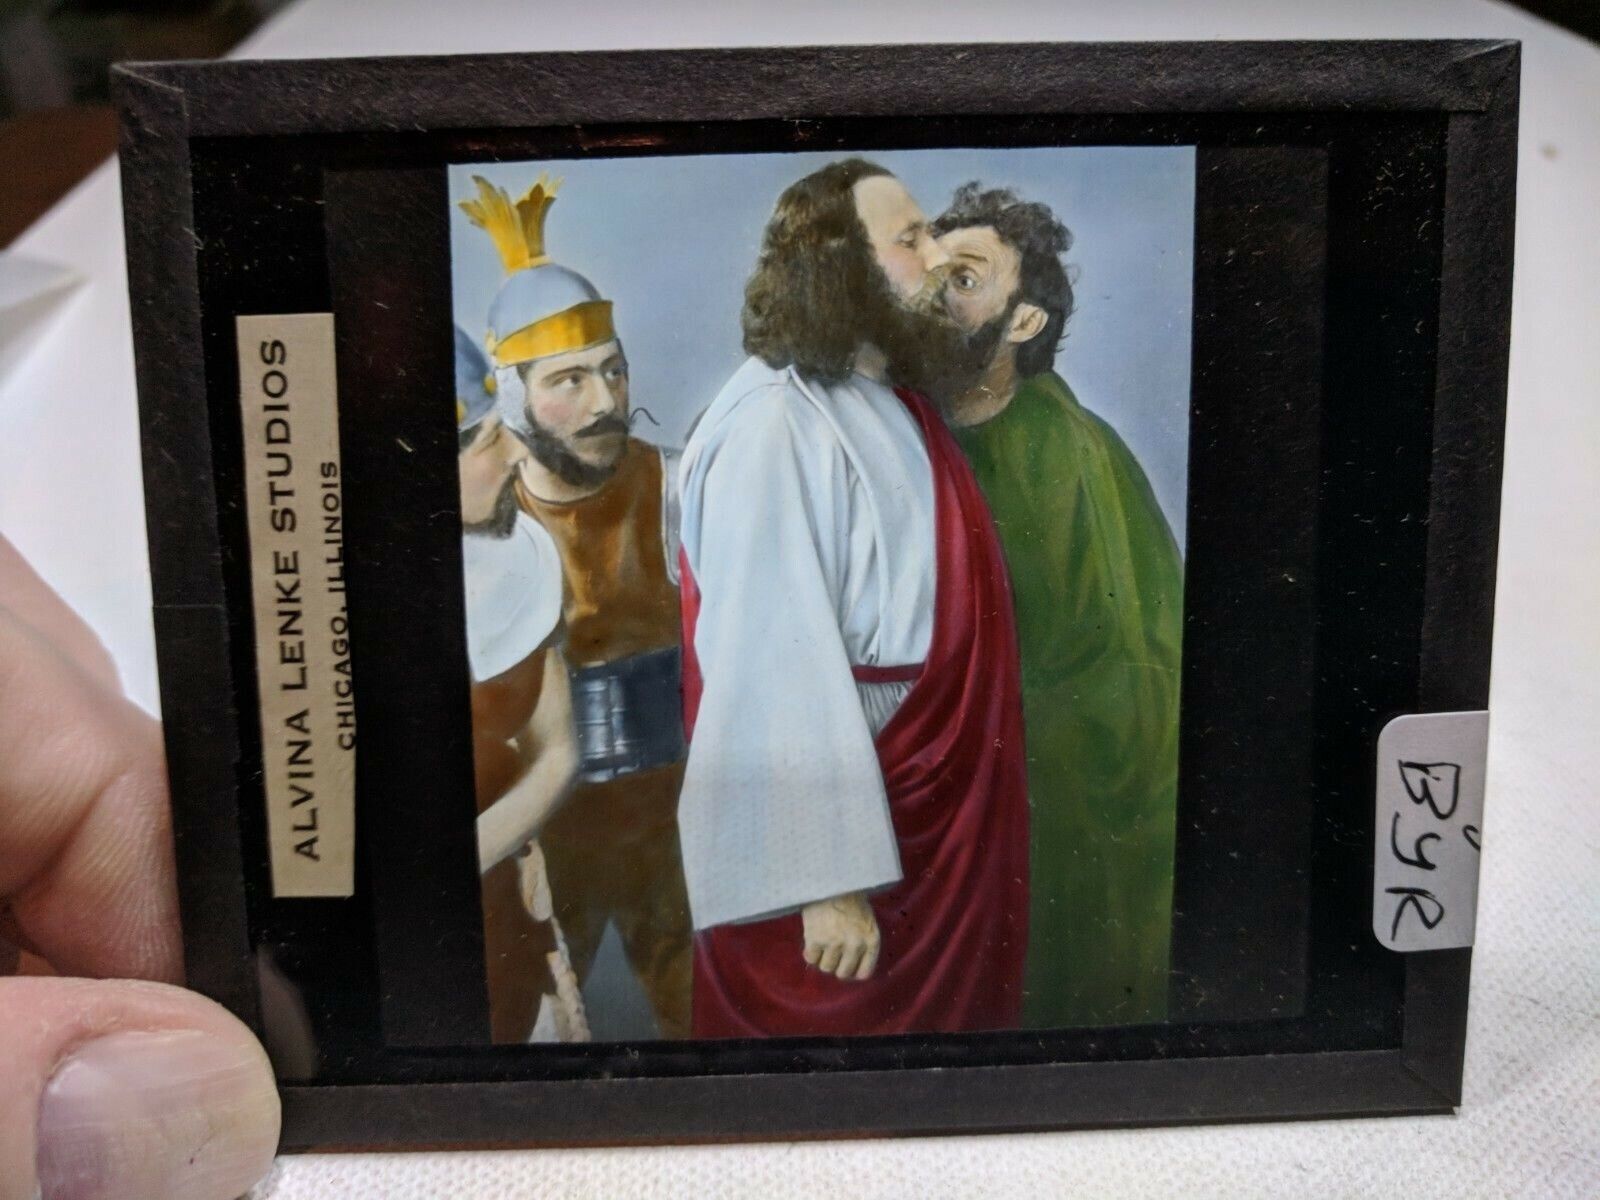 COLORED Glass Magic Lantern Slide BYR Cast on THE STAGE PASSION PLAY CHRIST #52